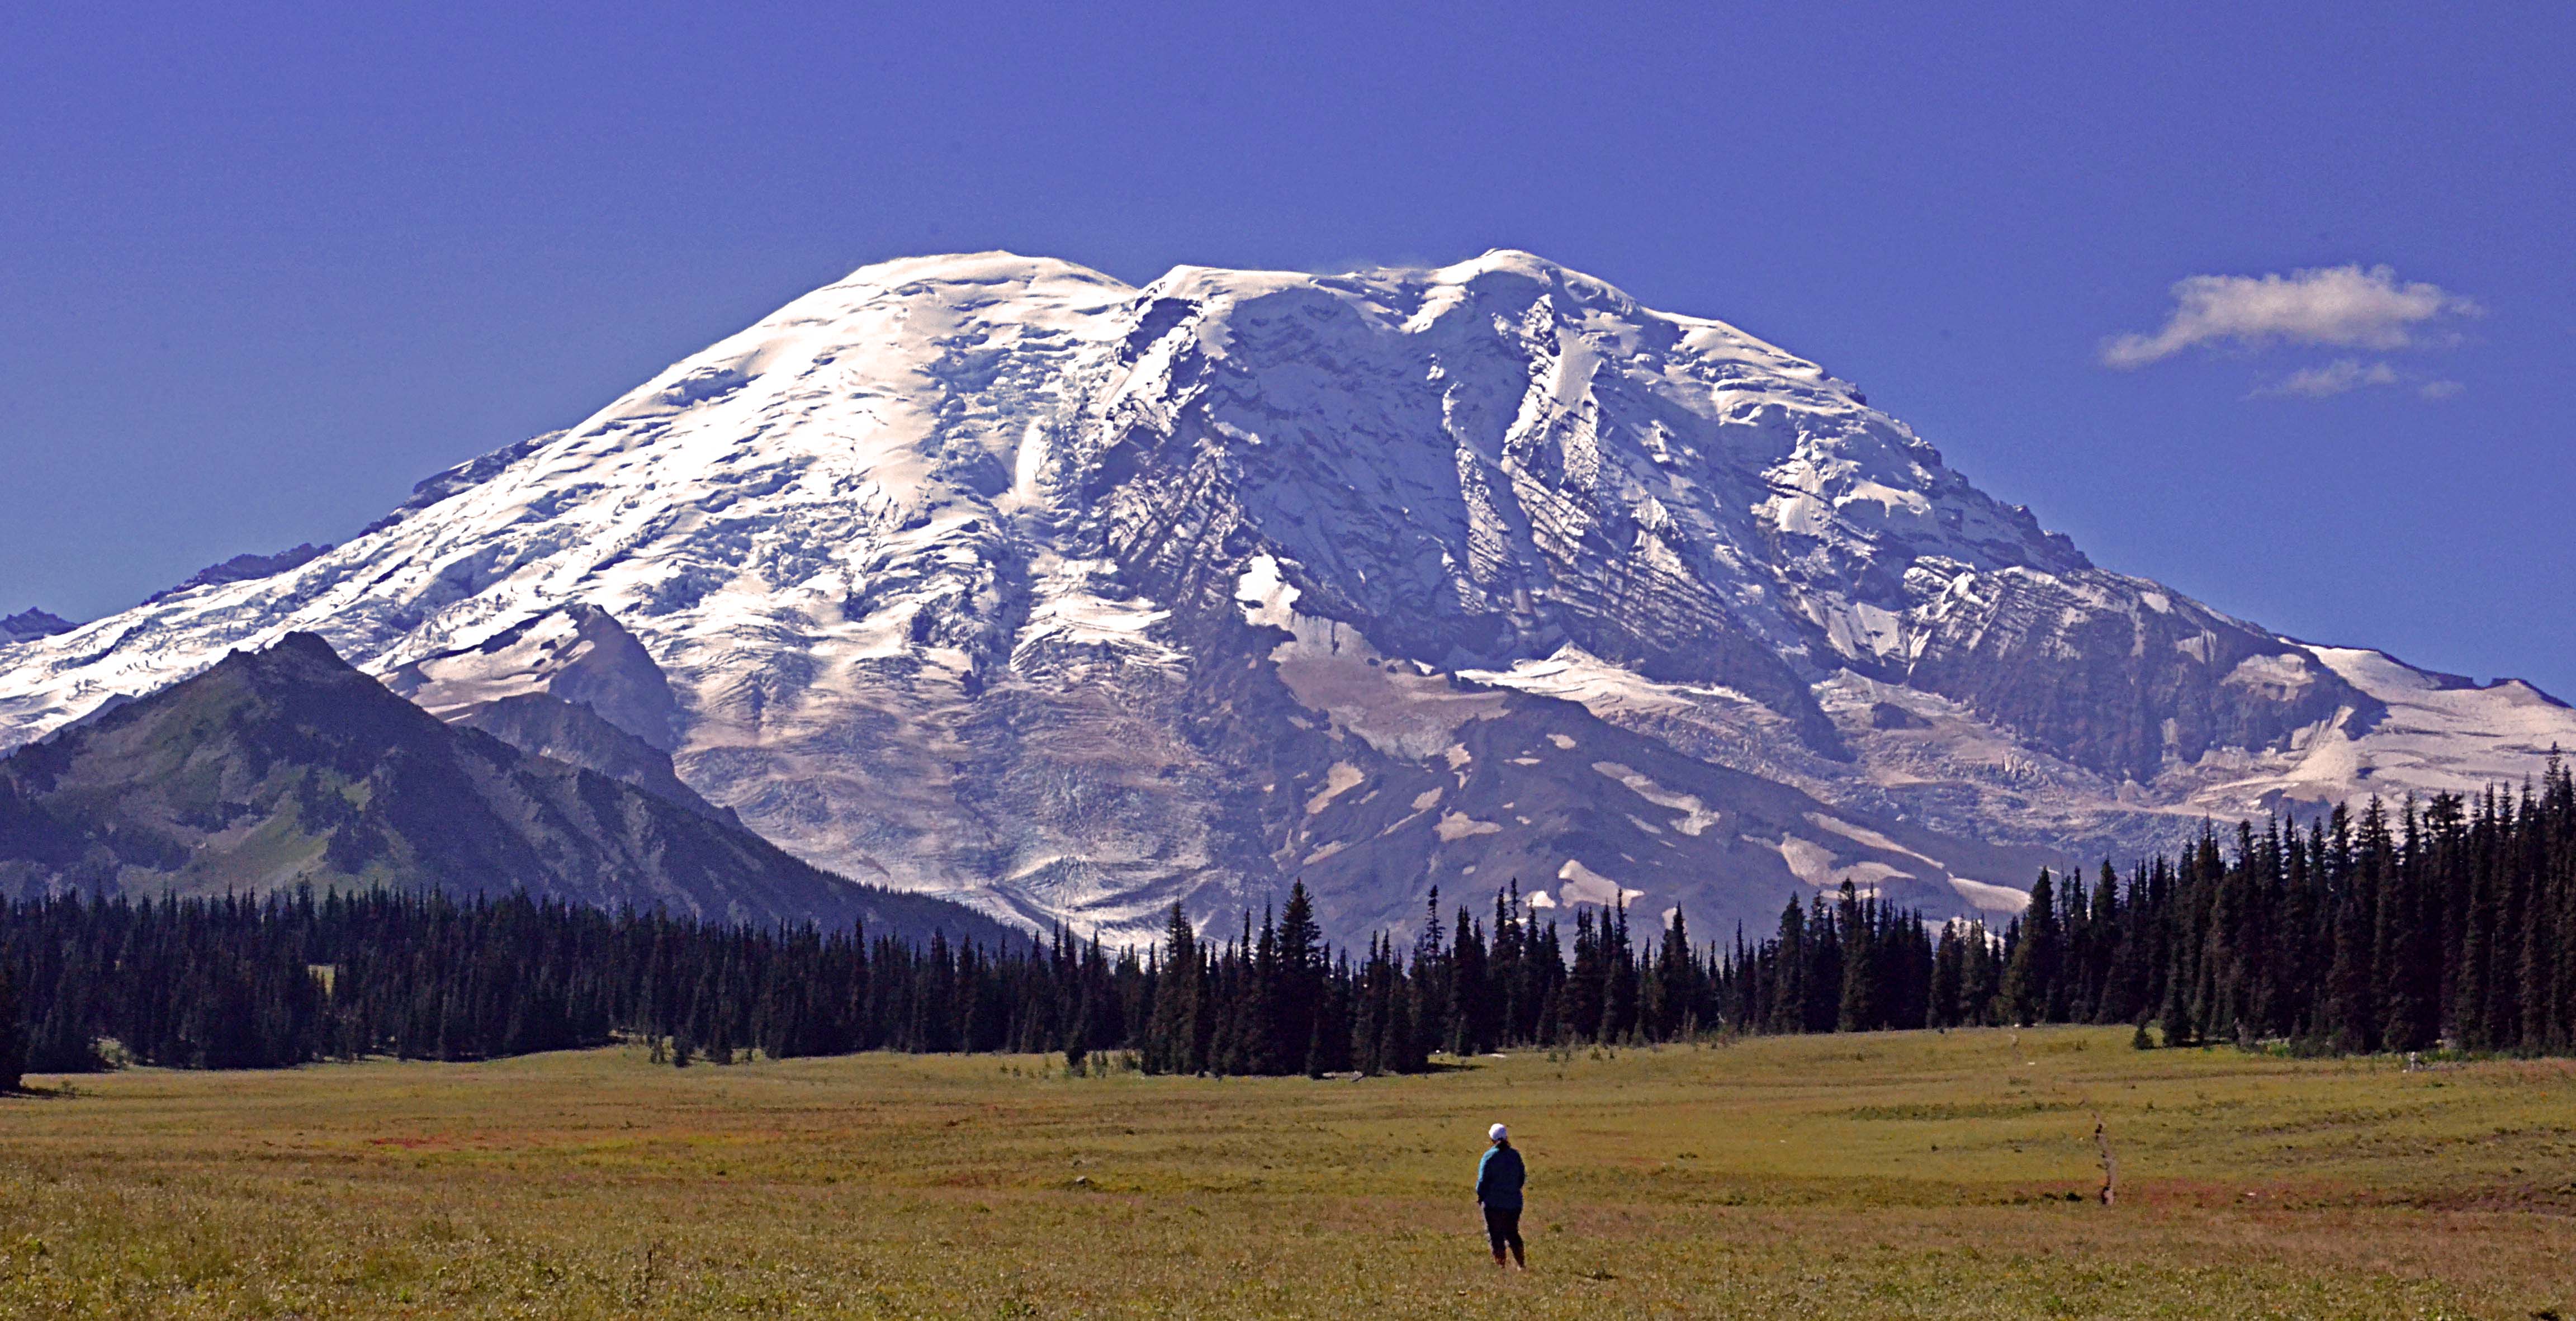 Grand Park to Backdoor of Mount Rainier  Travel, Photography, and Other Fun Adventures